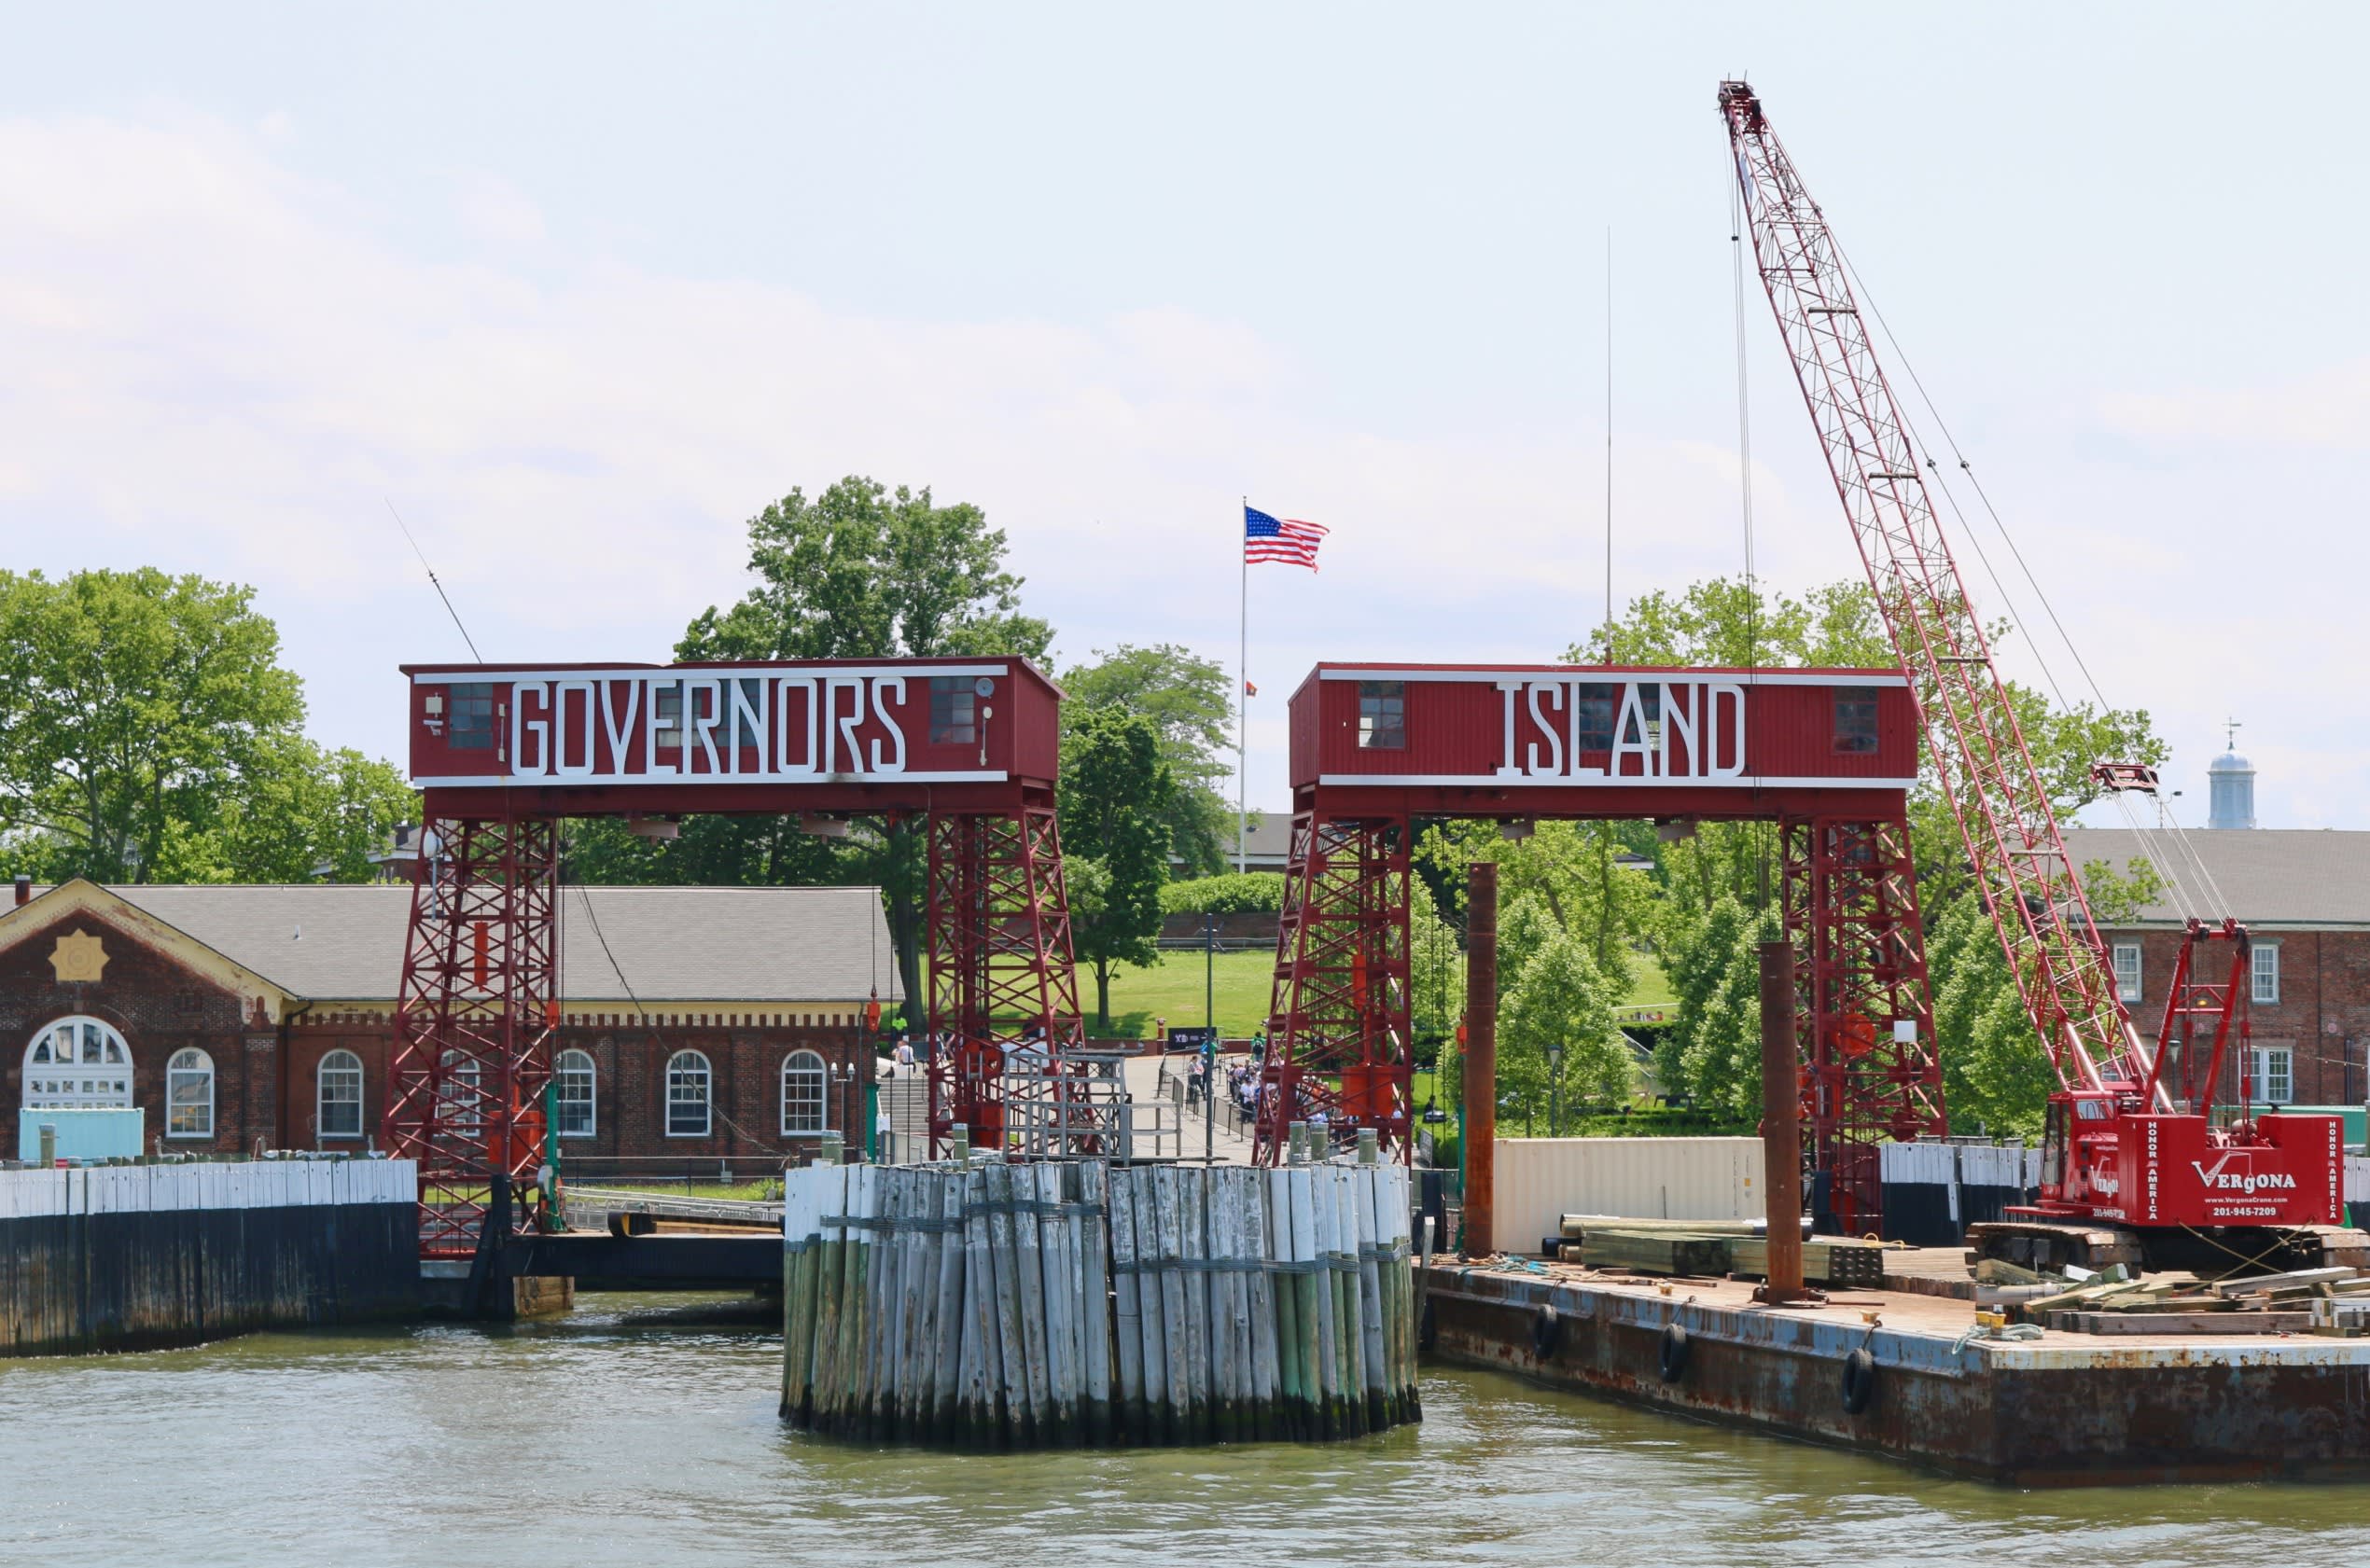 a barge in the US with two overhead signs, one that reads 'Governors' and the other that reads 'Island'